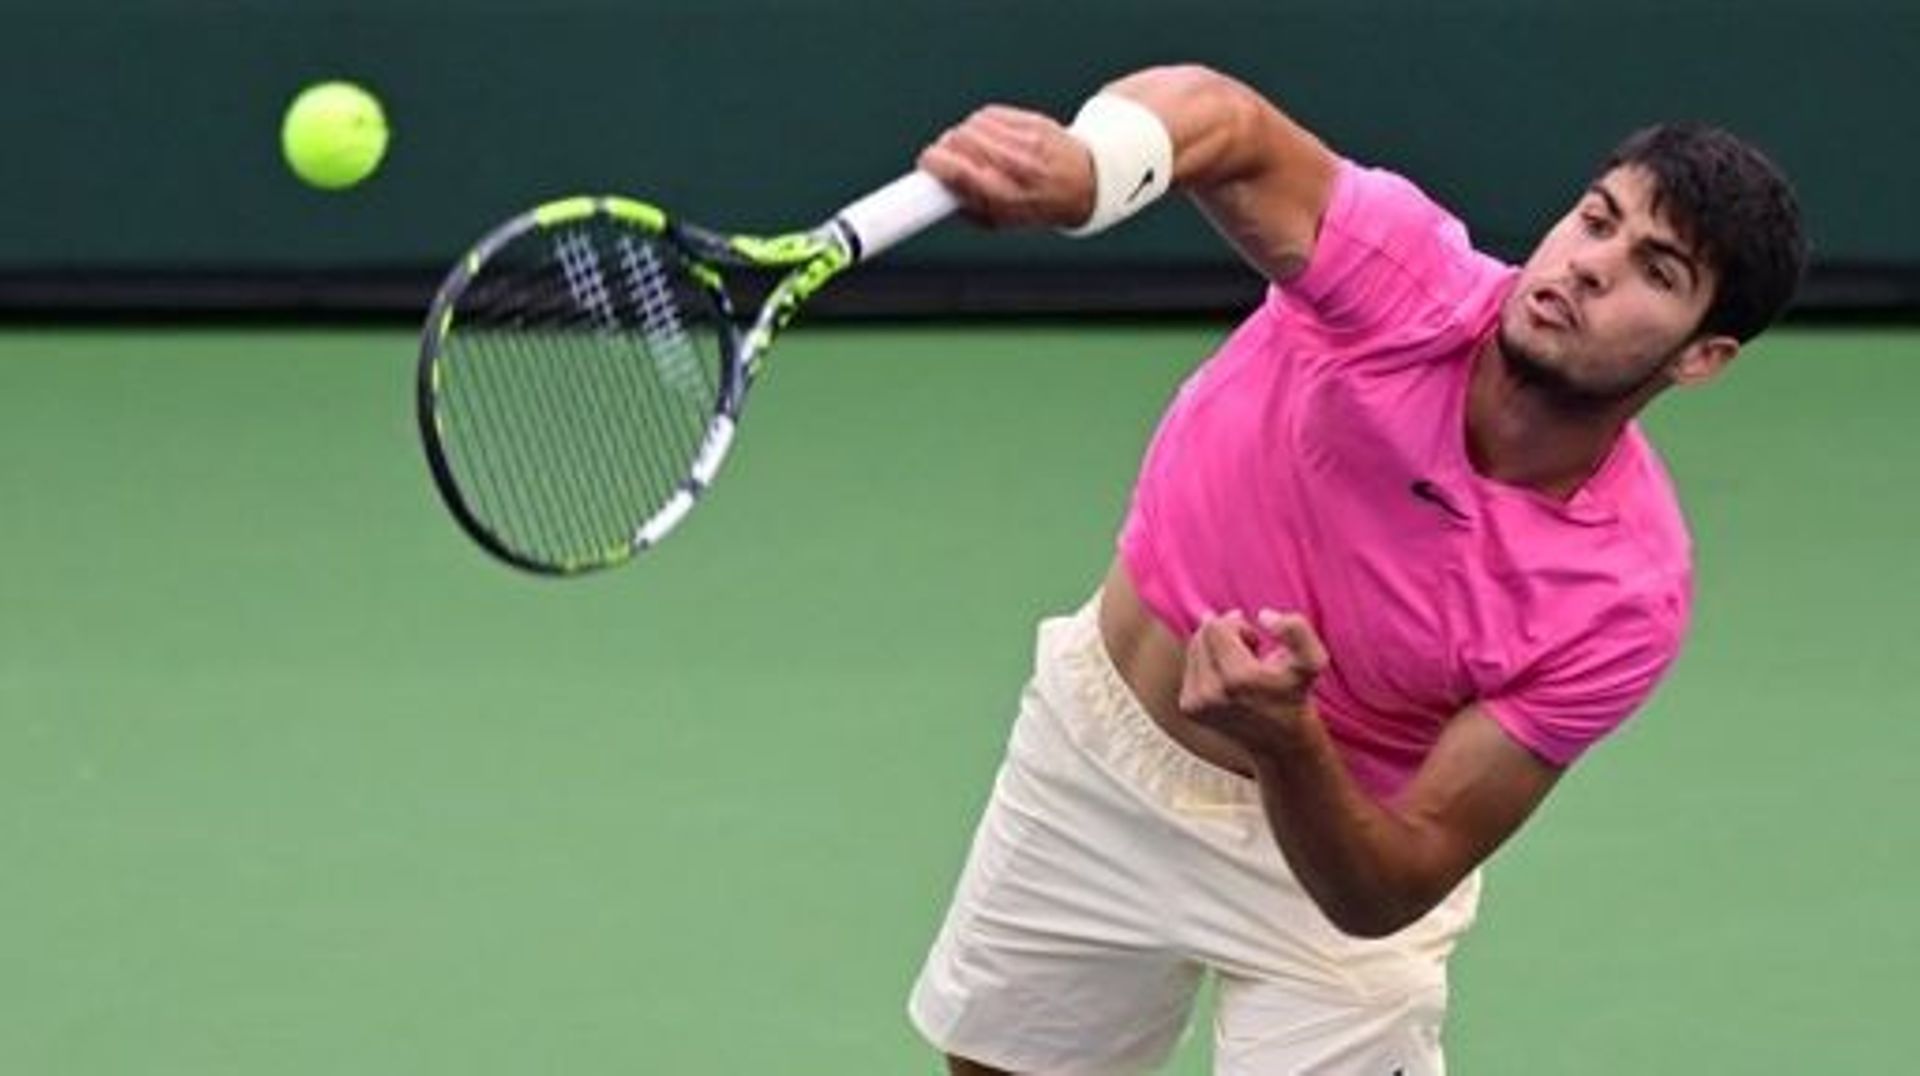 Carlos Alcaraz of Spain serves to Daniil Medvedev of Russia in the men's final at the 2023 ATP Indian Wells Open on March 19, 2023 in Indian Wells, California.   Frederic J. BROWN / AFP